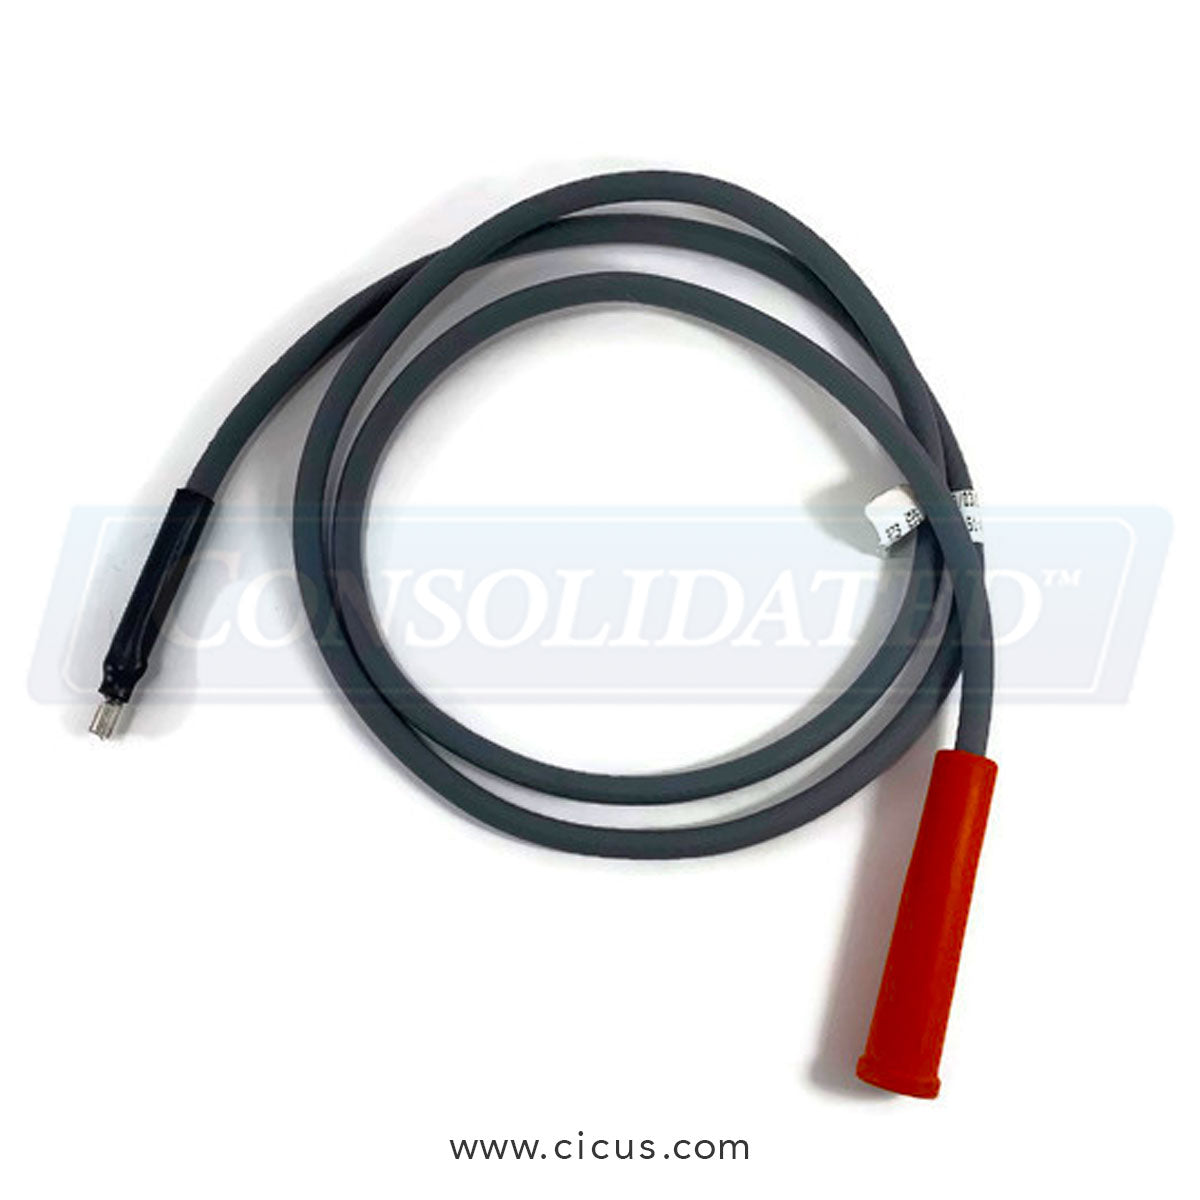 Alliance Laundry Systems Suppression Cable - High Voltage 200 [44239703]